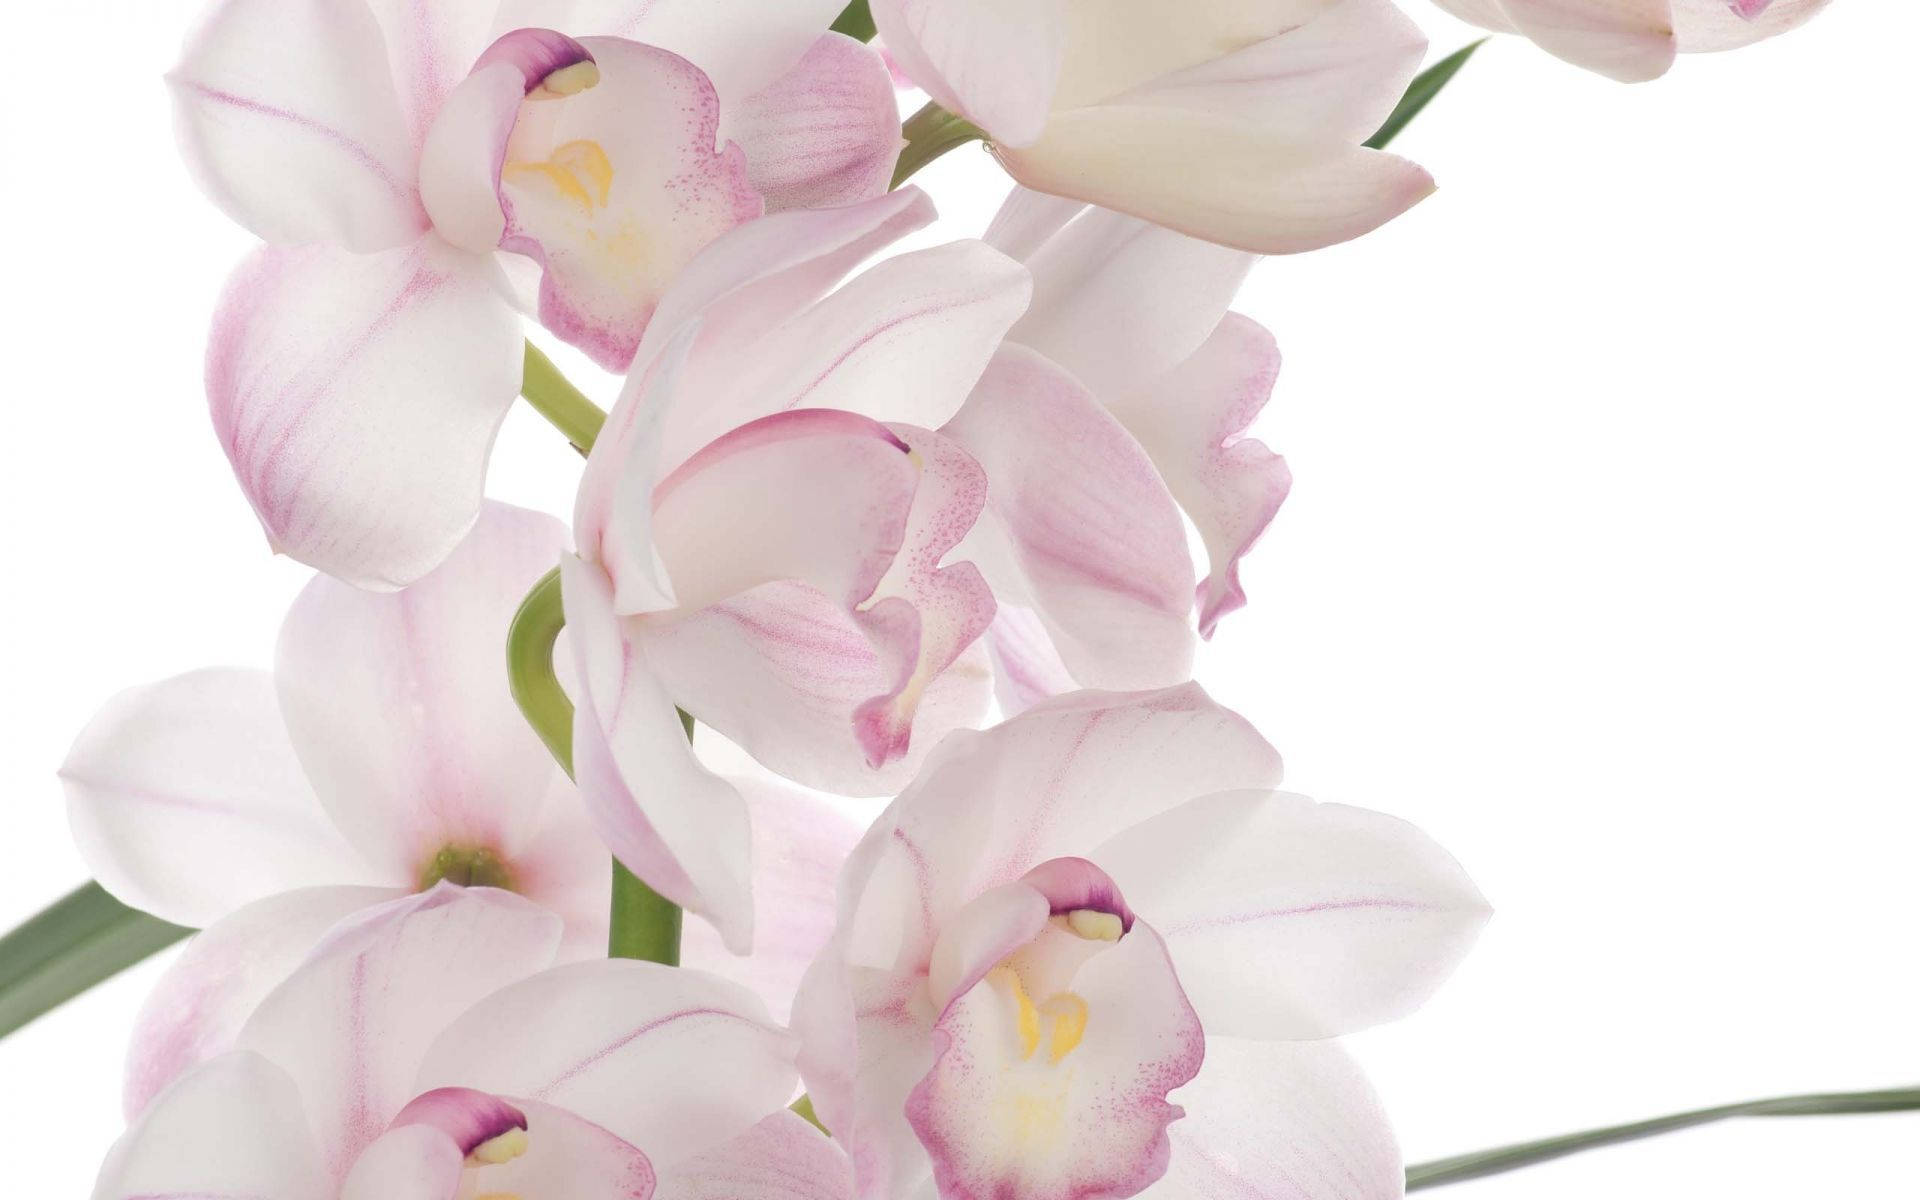 White Orchid With Pink Edge Petals